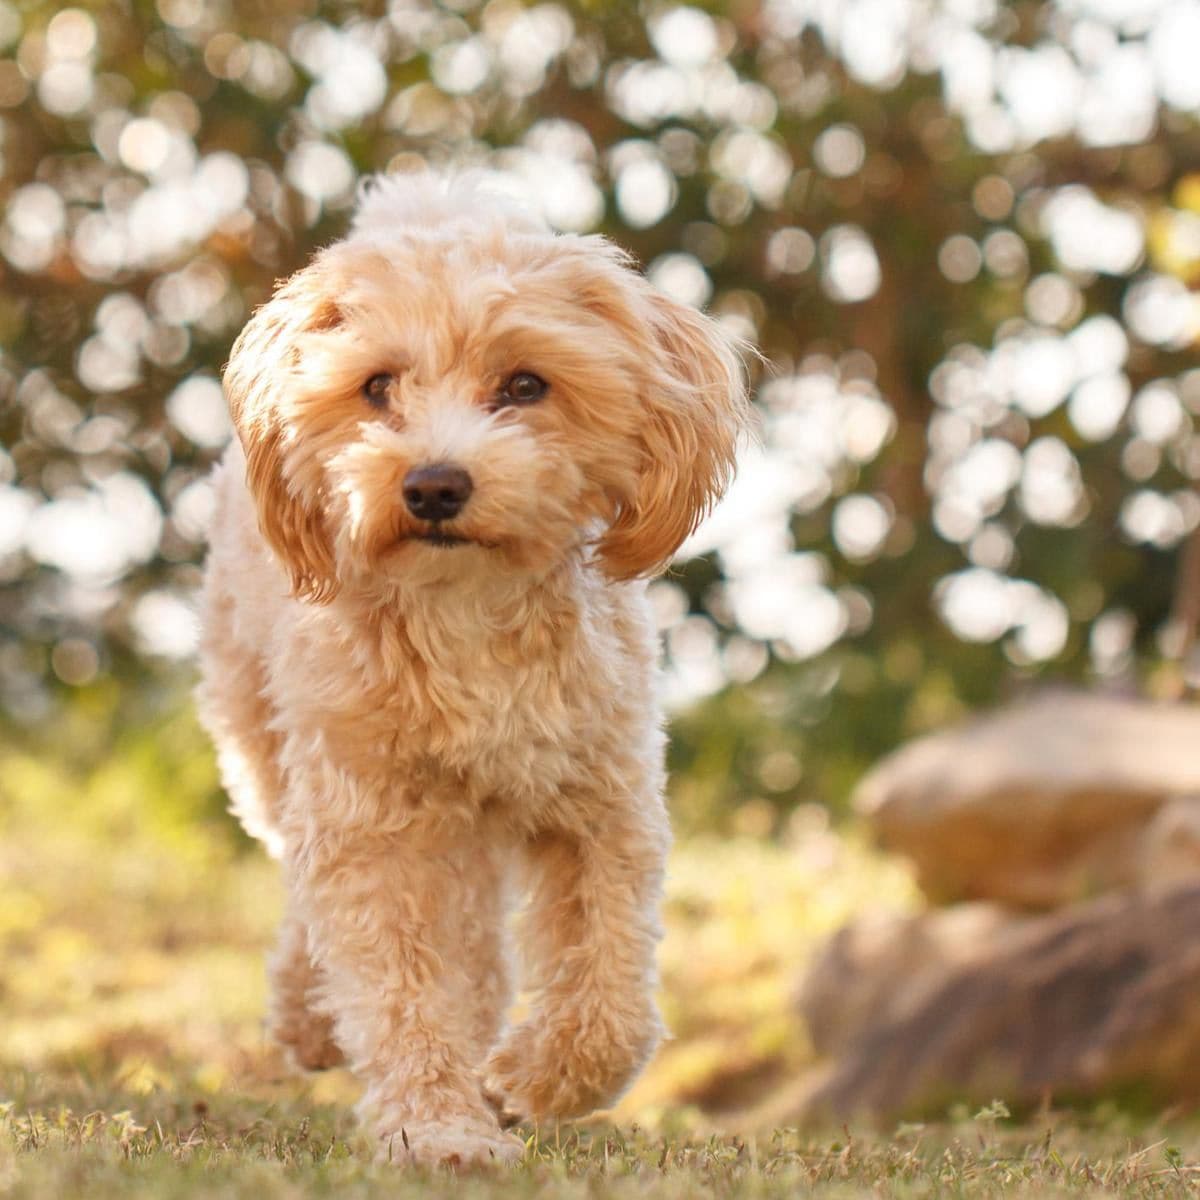 Meet the Maltipoo: All about one of the most adorable breeds of small dog